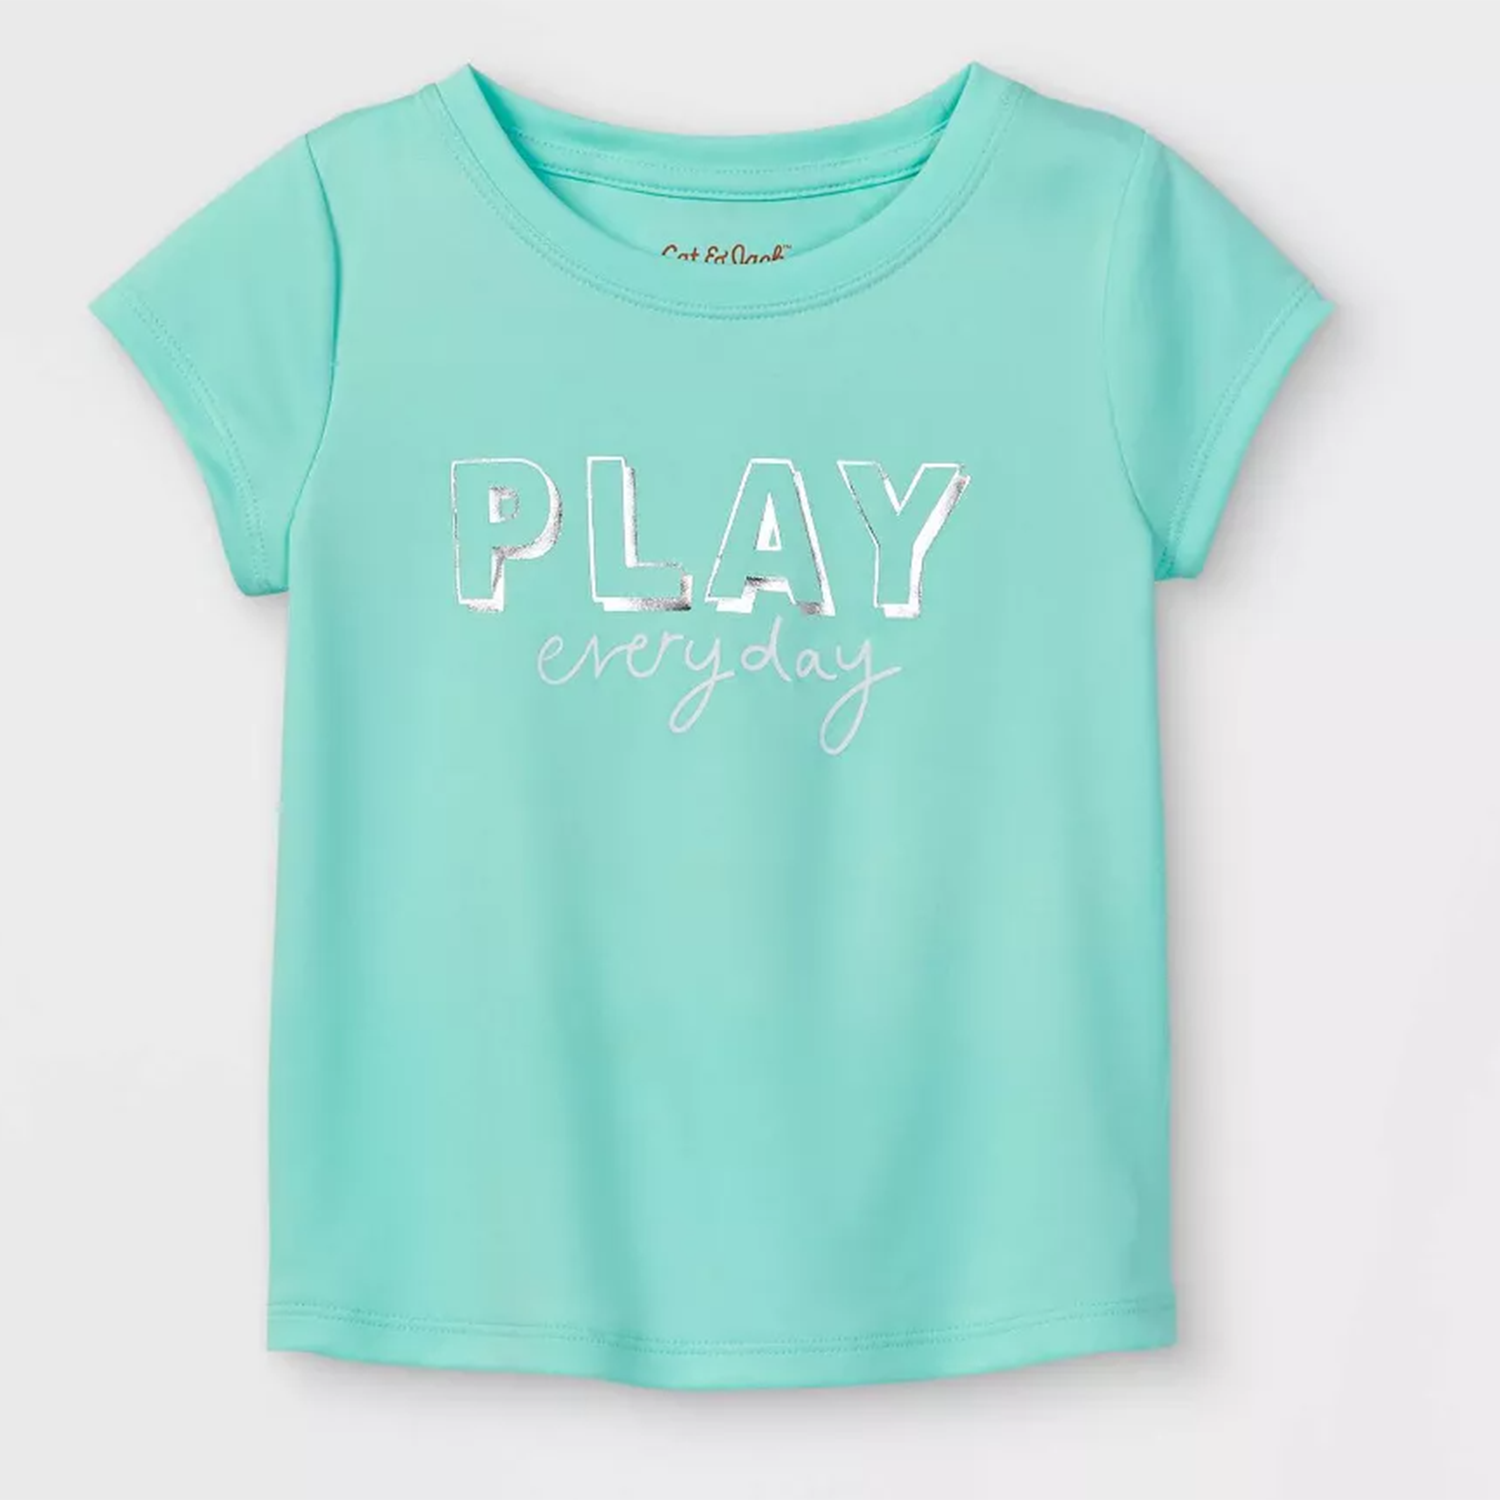 Cat & Jack Play Every Day Shirt 